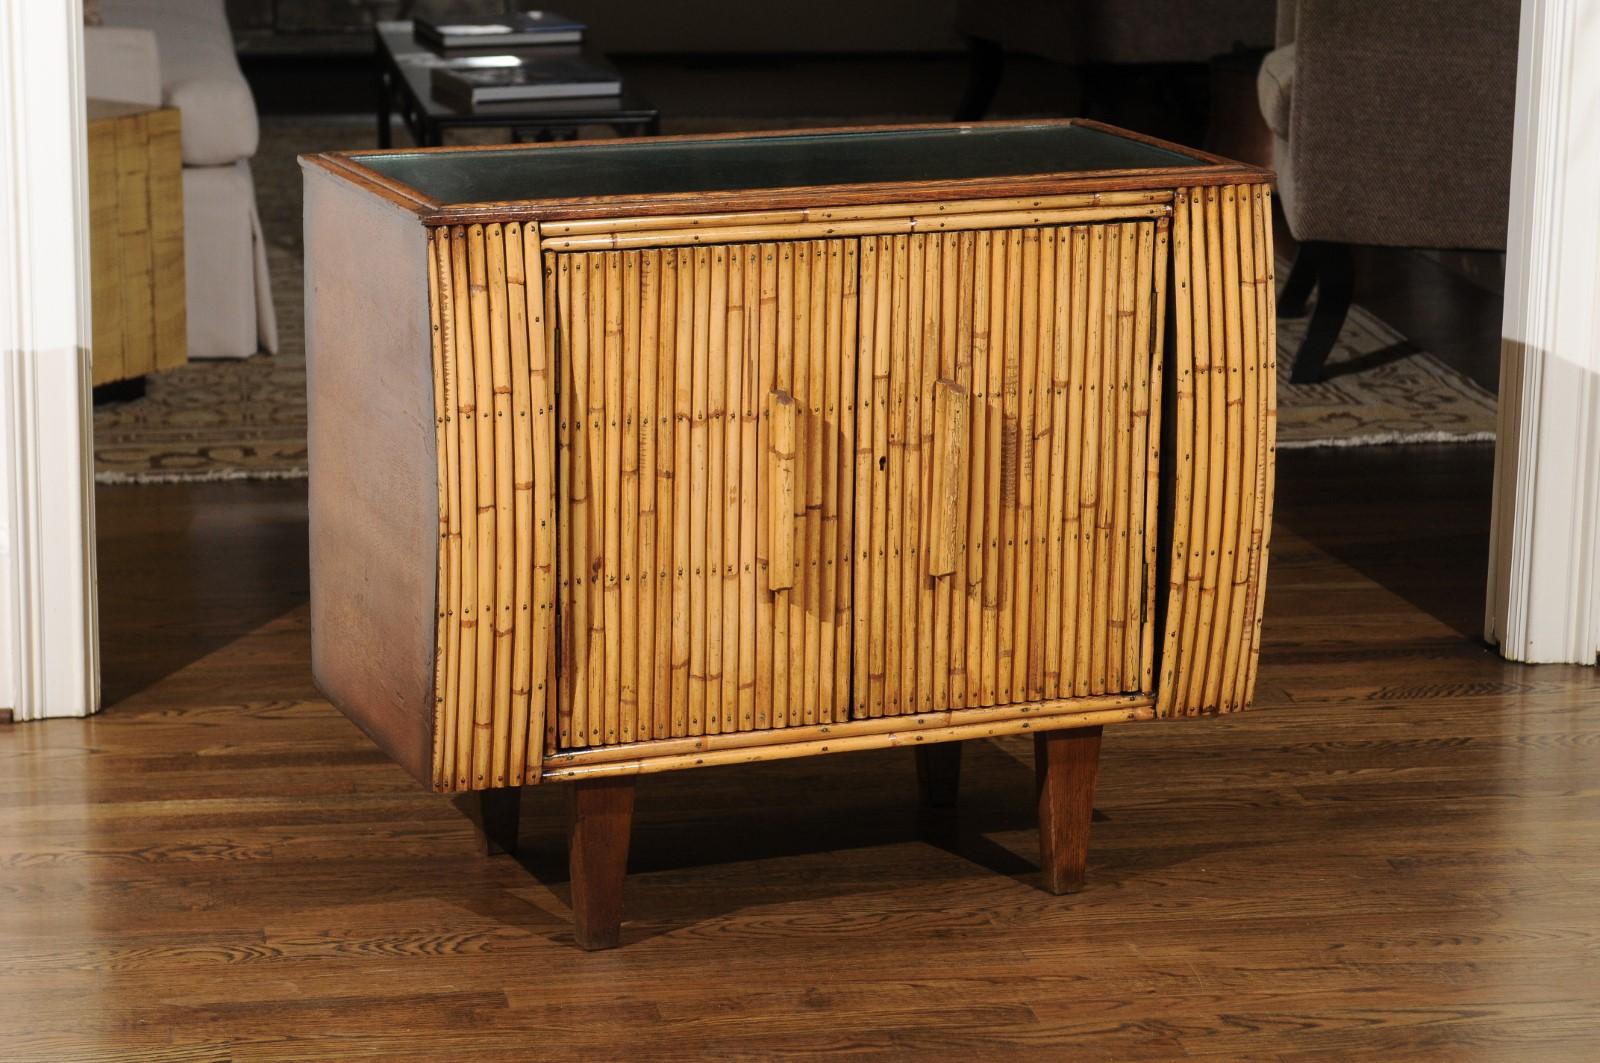 An exquisite Art Deco cabinet, France, circa 1940. Expertly crafted oak construction with a subtle bullnose case detail framing the doors. The cabinet front is veneered in bamboo; simple rattan handles add accent. Interior and accents in black